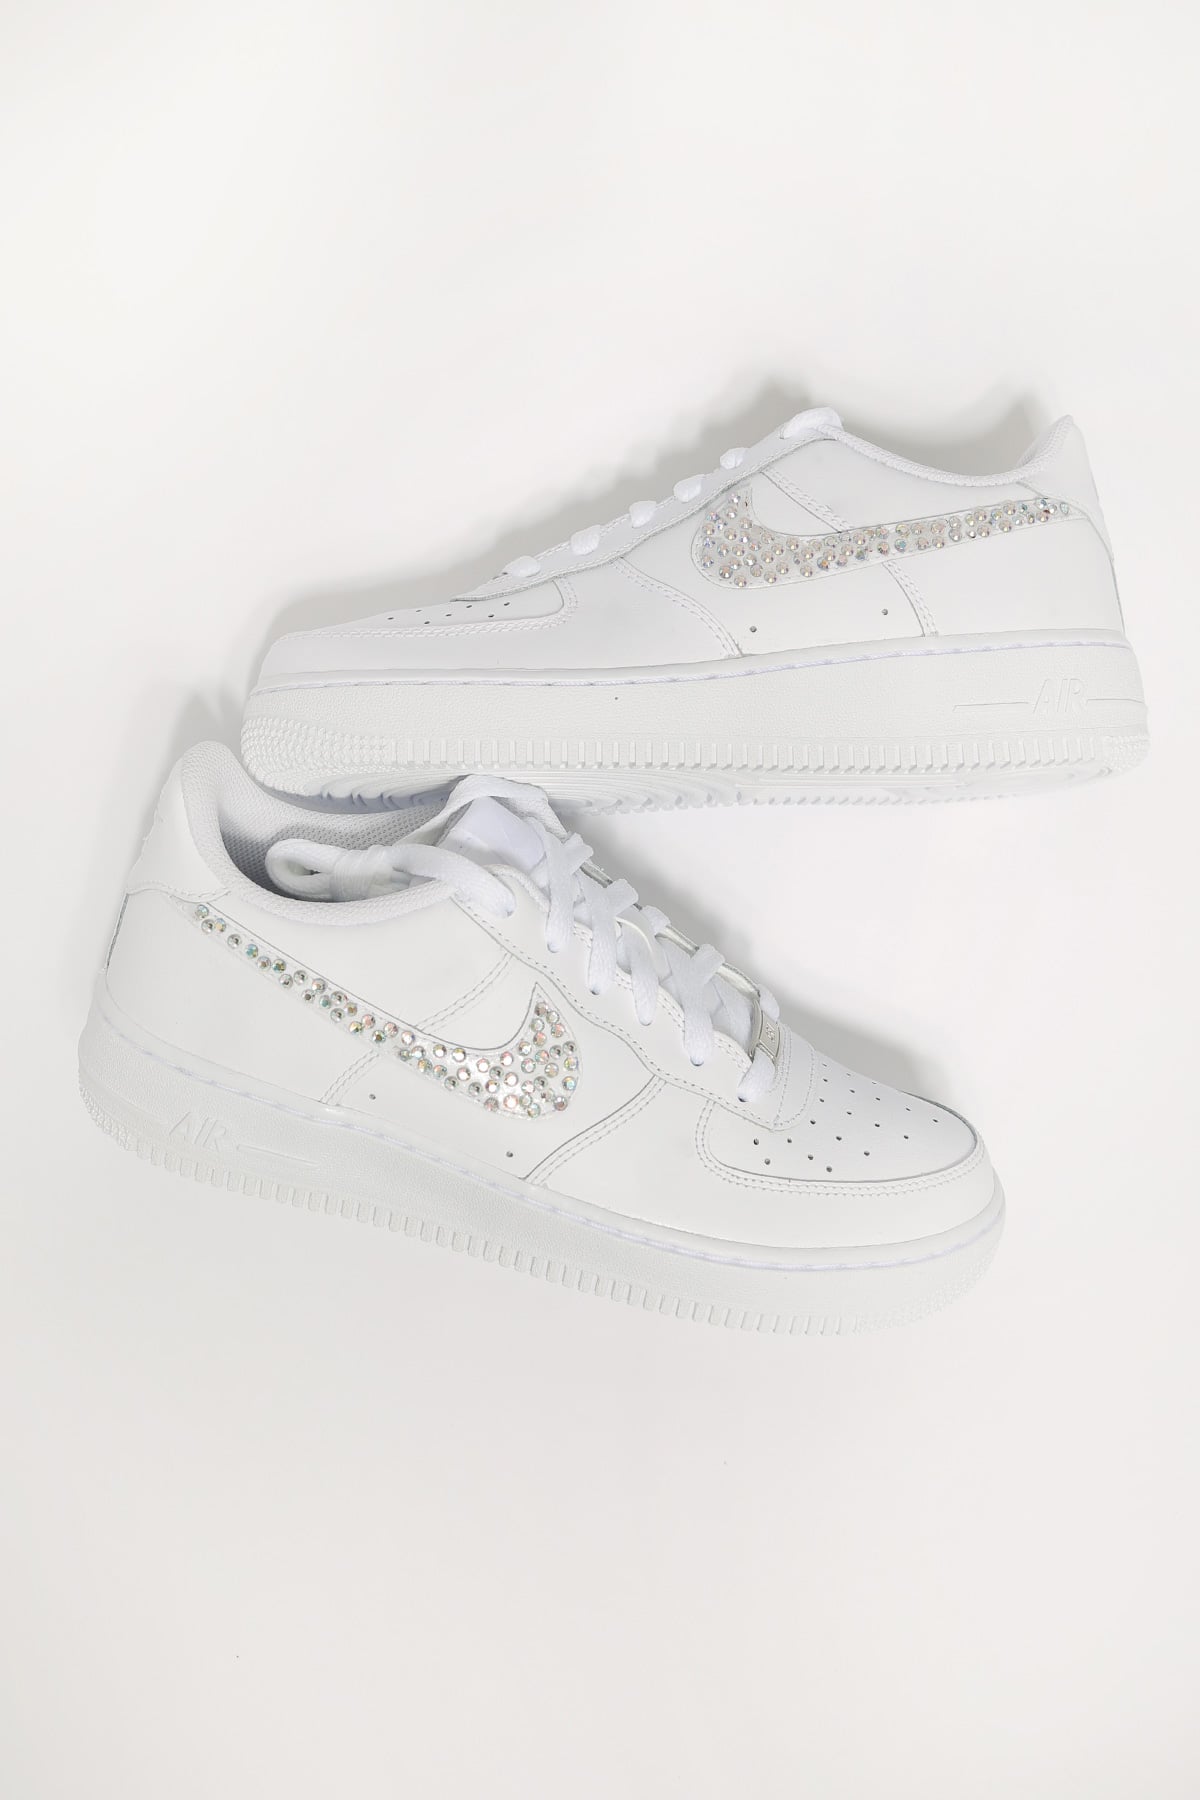 air force 1 outfit ideas